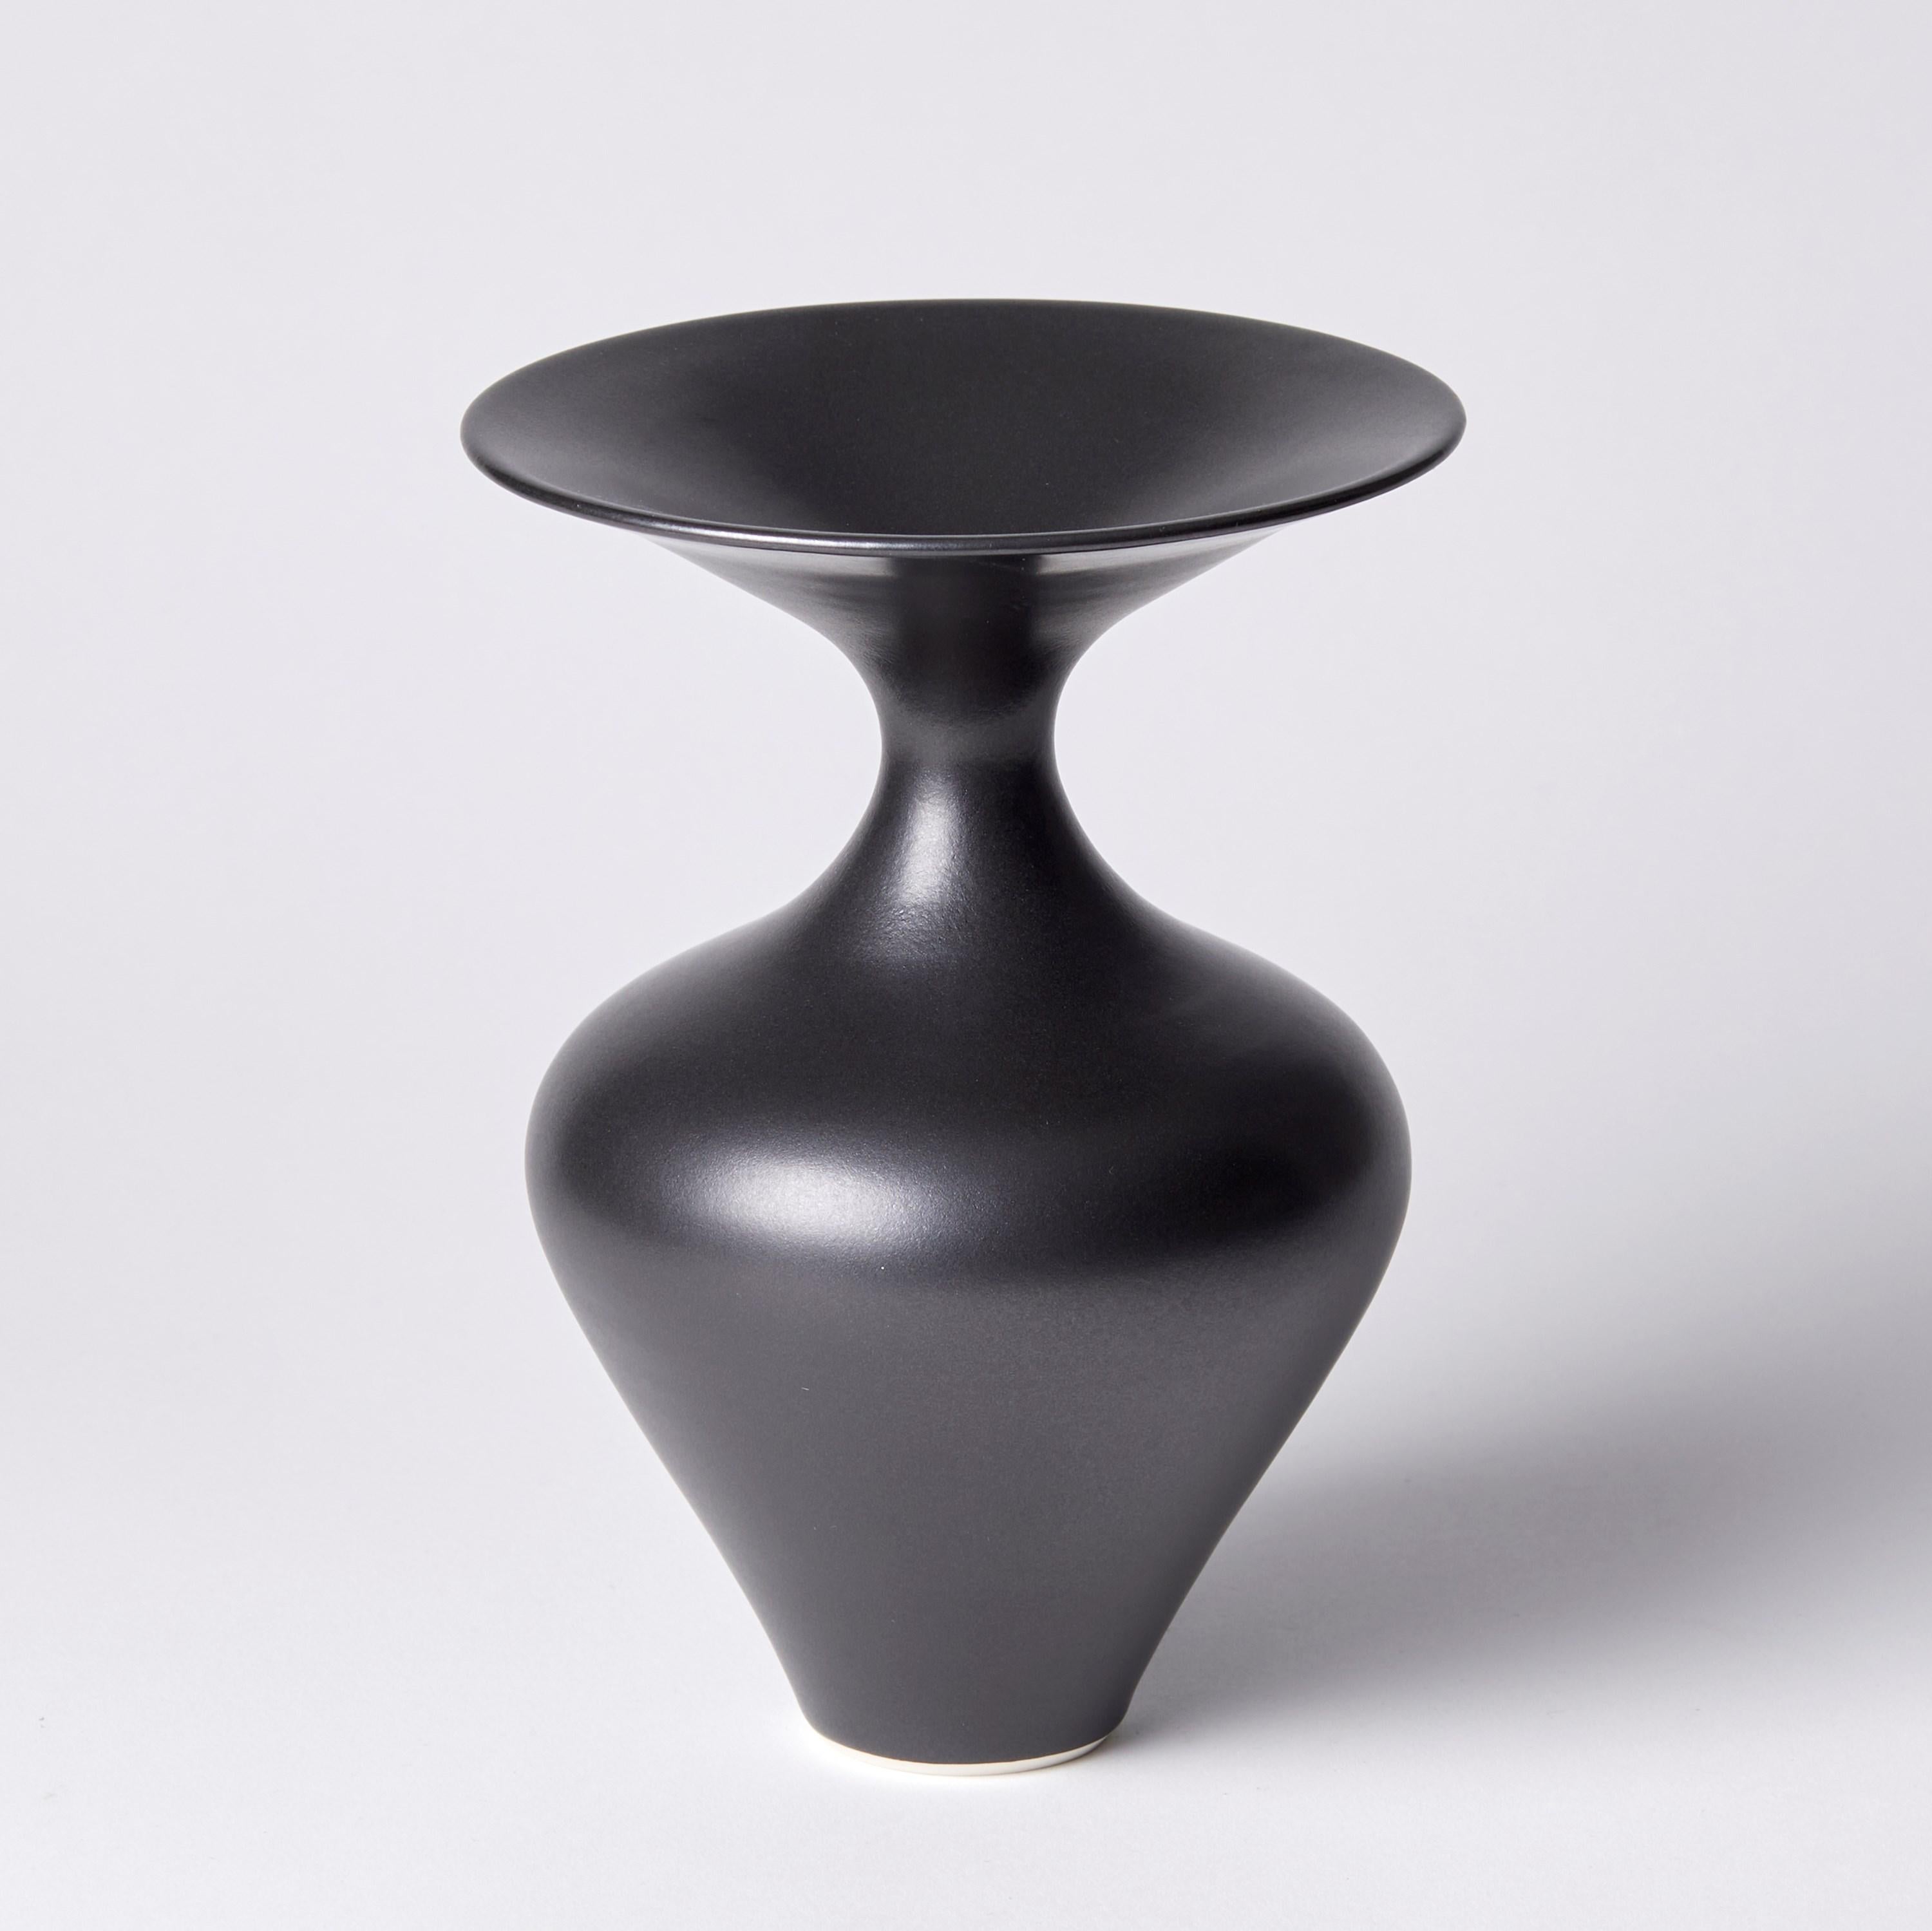 ‘Black classic vase’ is a unique porcelain sculptural vessel by the British artist, Vivienne Foley. 

Vivienne Foley is based in Gloucestershire where she produces exquisite ceramic sculpture. Although in essence they are often functional pieces